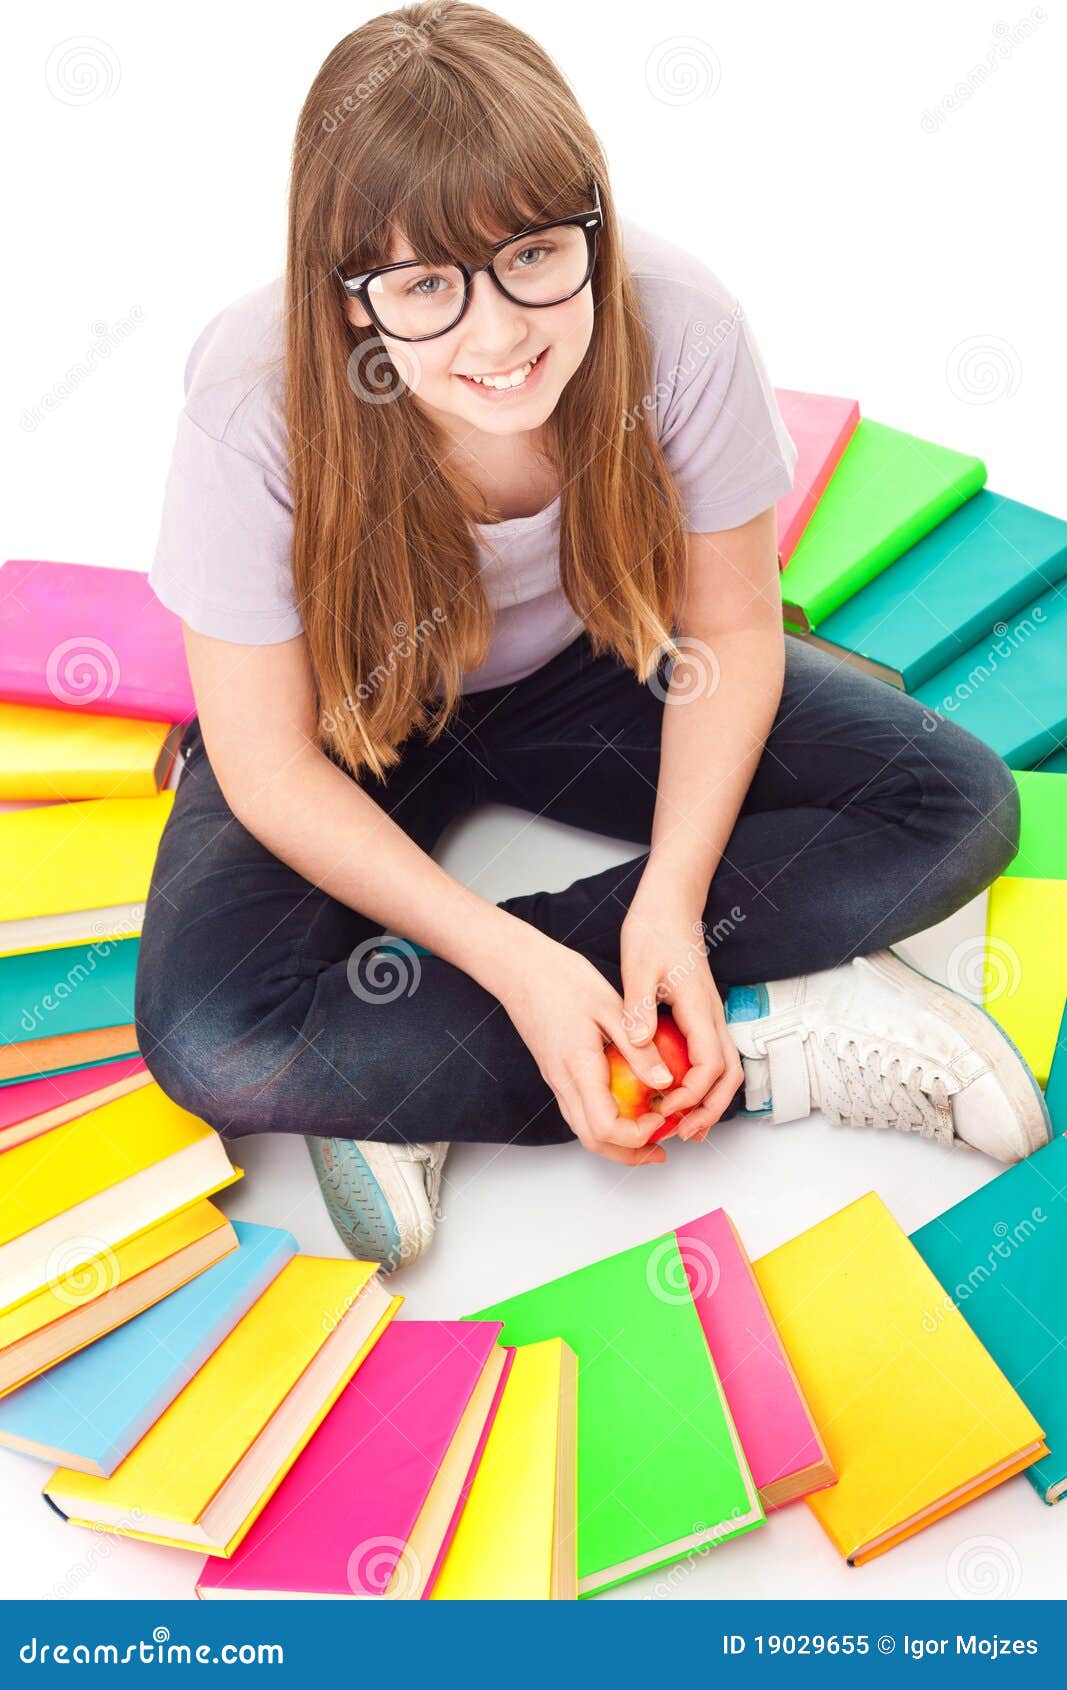 child with lot of books siting on floor